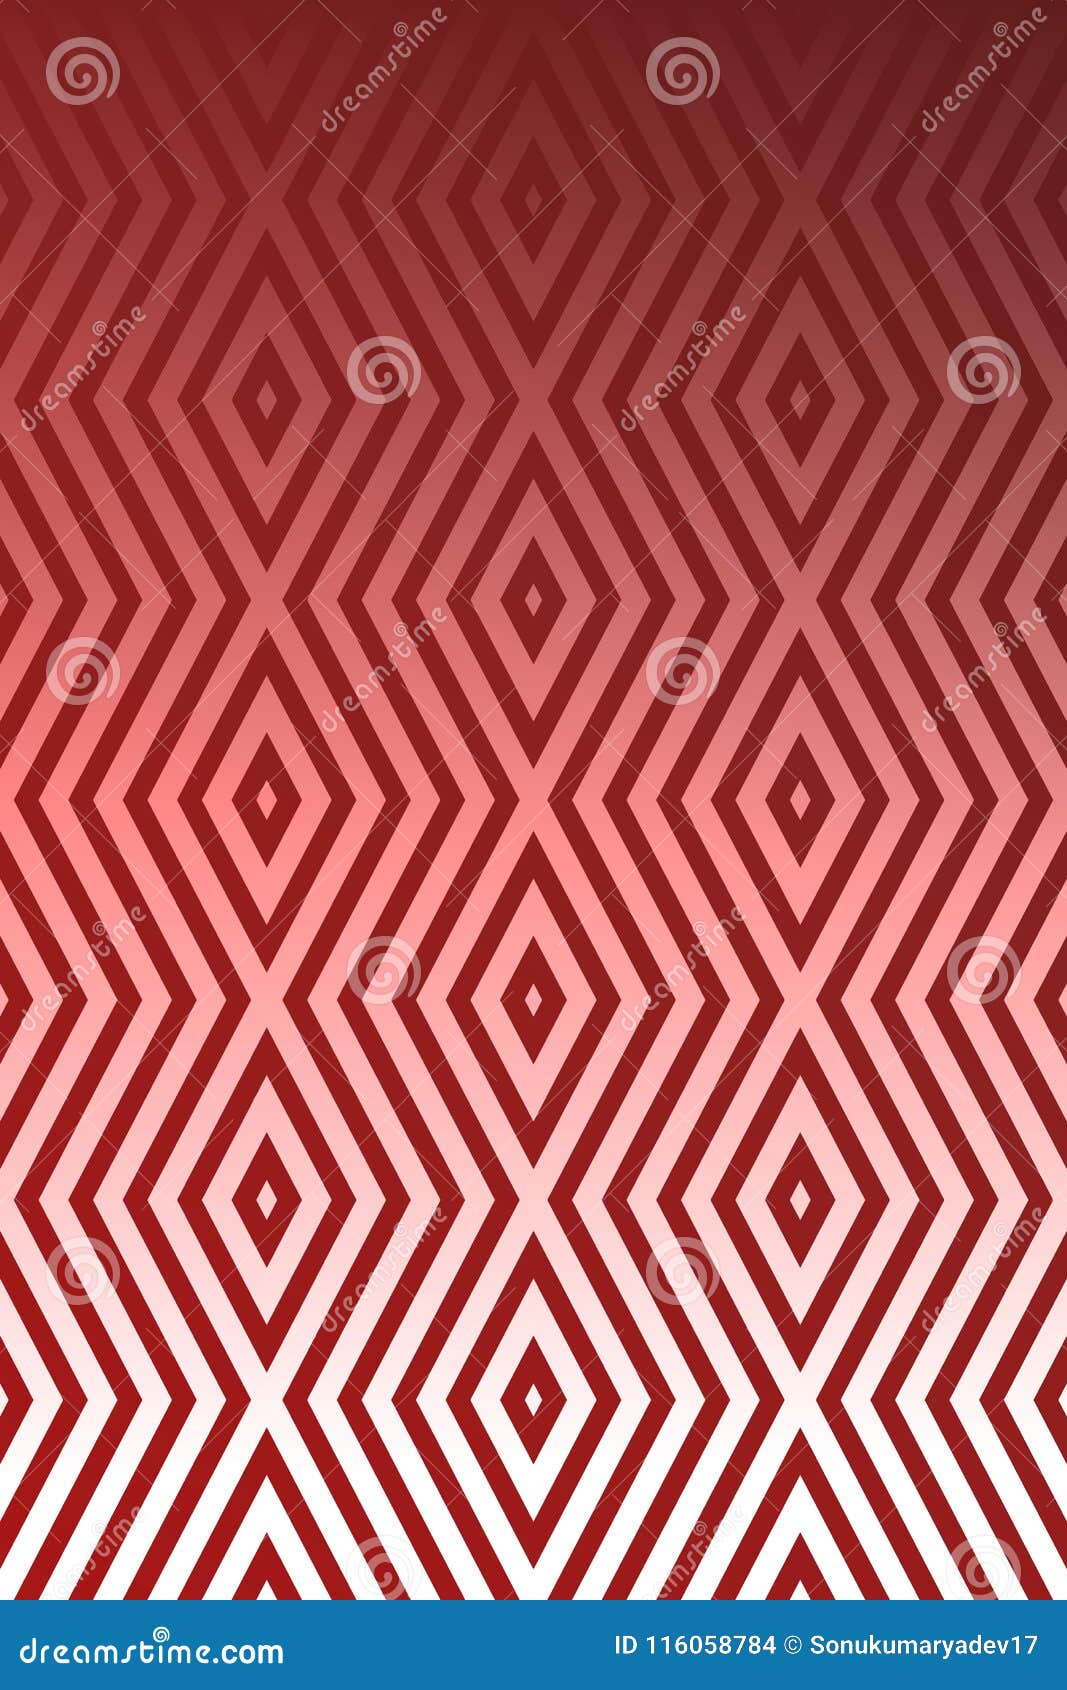 red color seamless abstract textures background